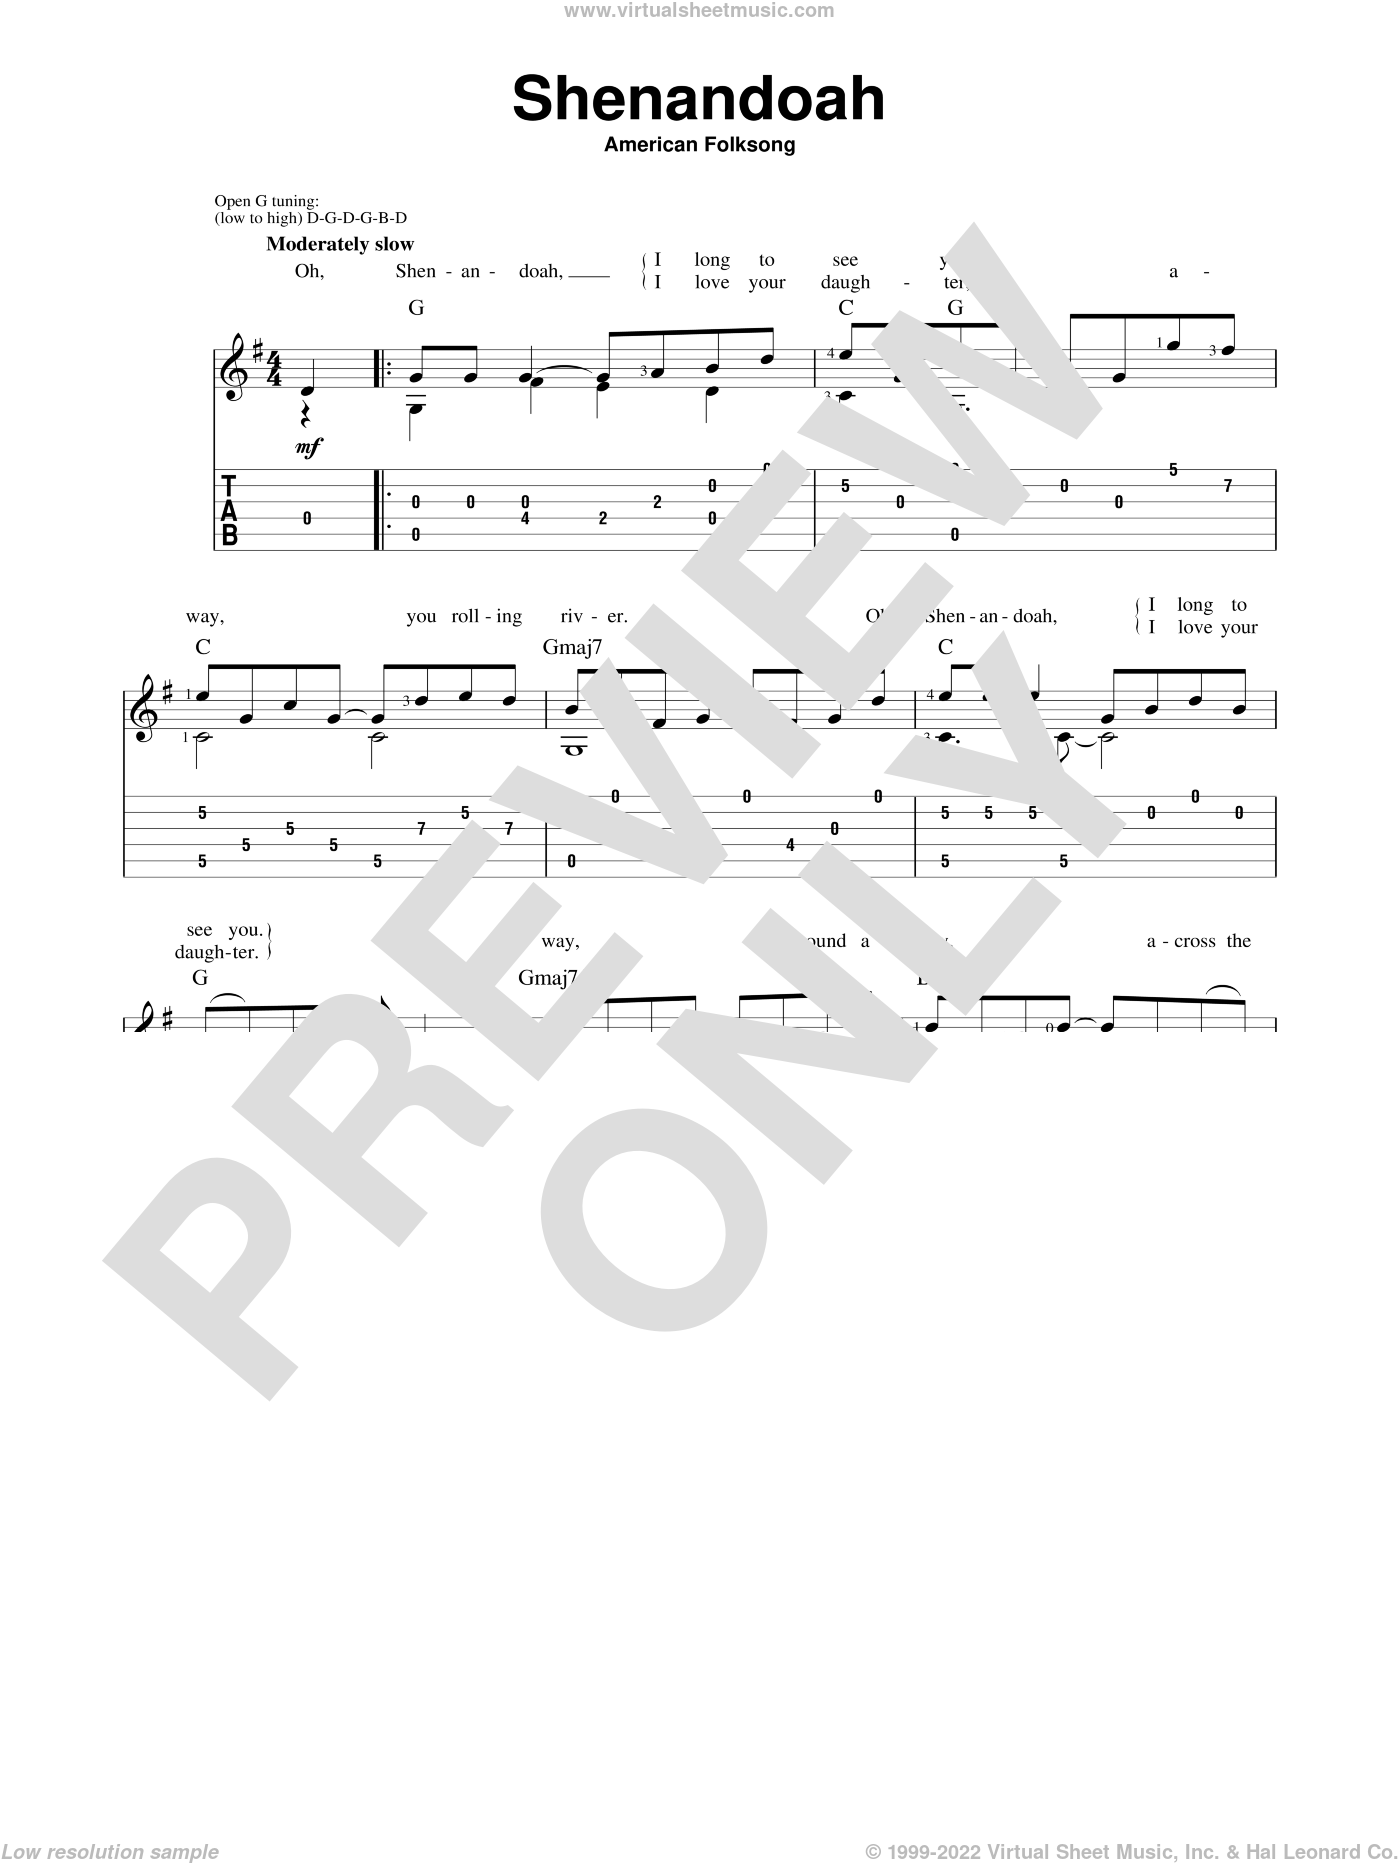 Shenandoah for Voice or Guitar, with Free Lead Sheets and Guitar Tabs